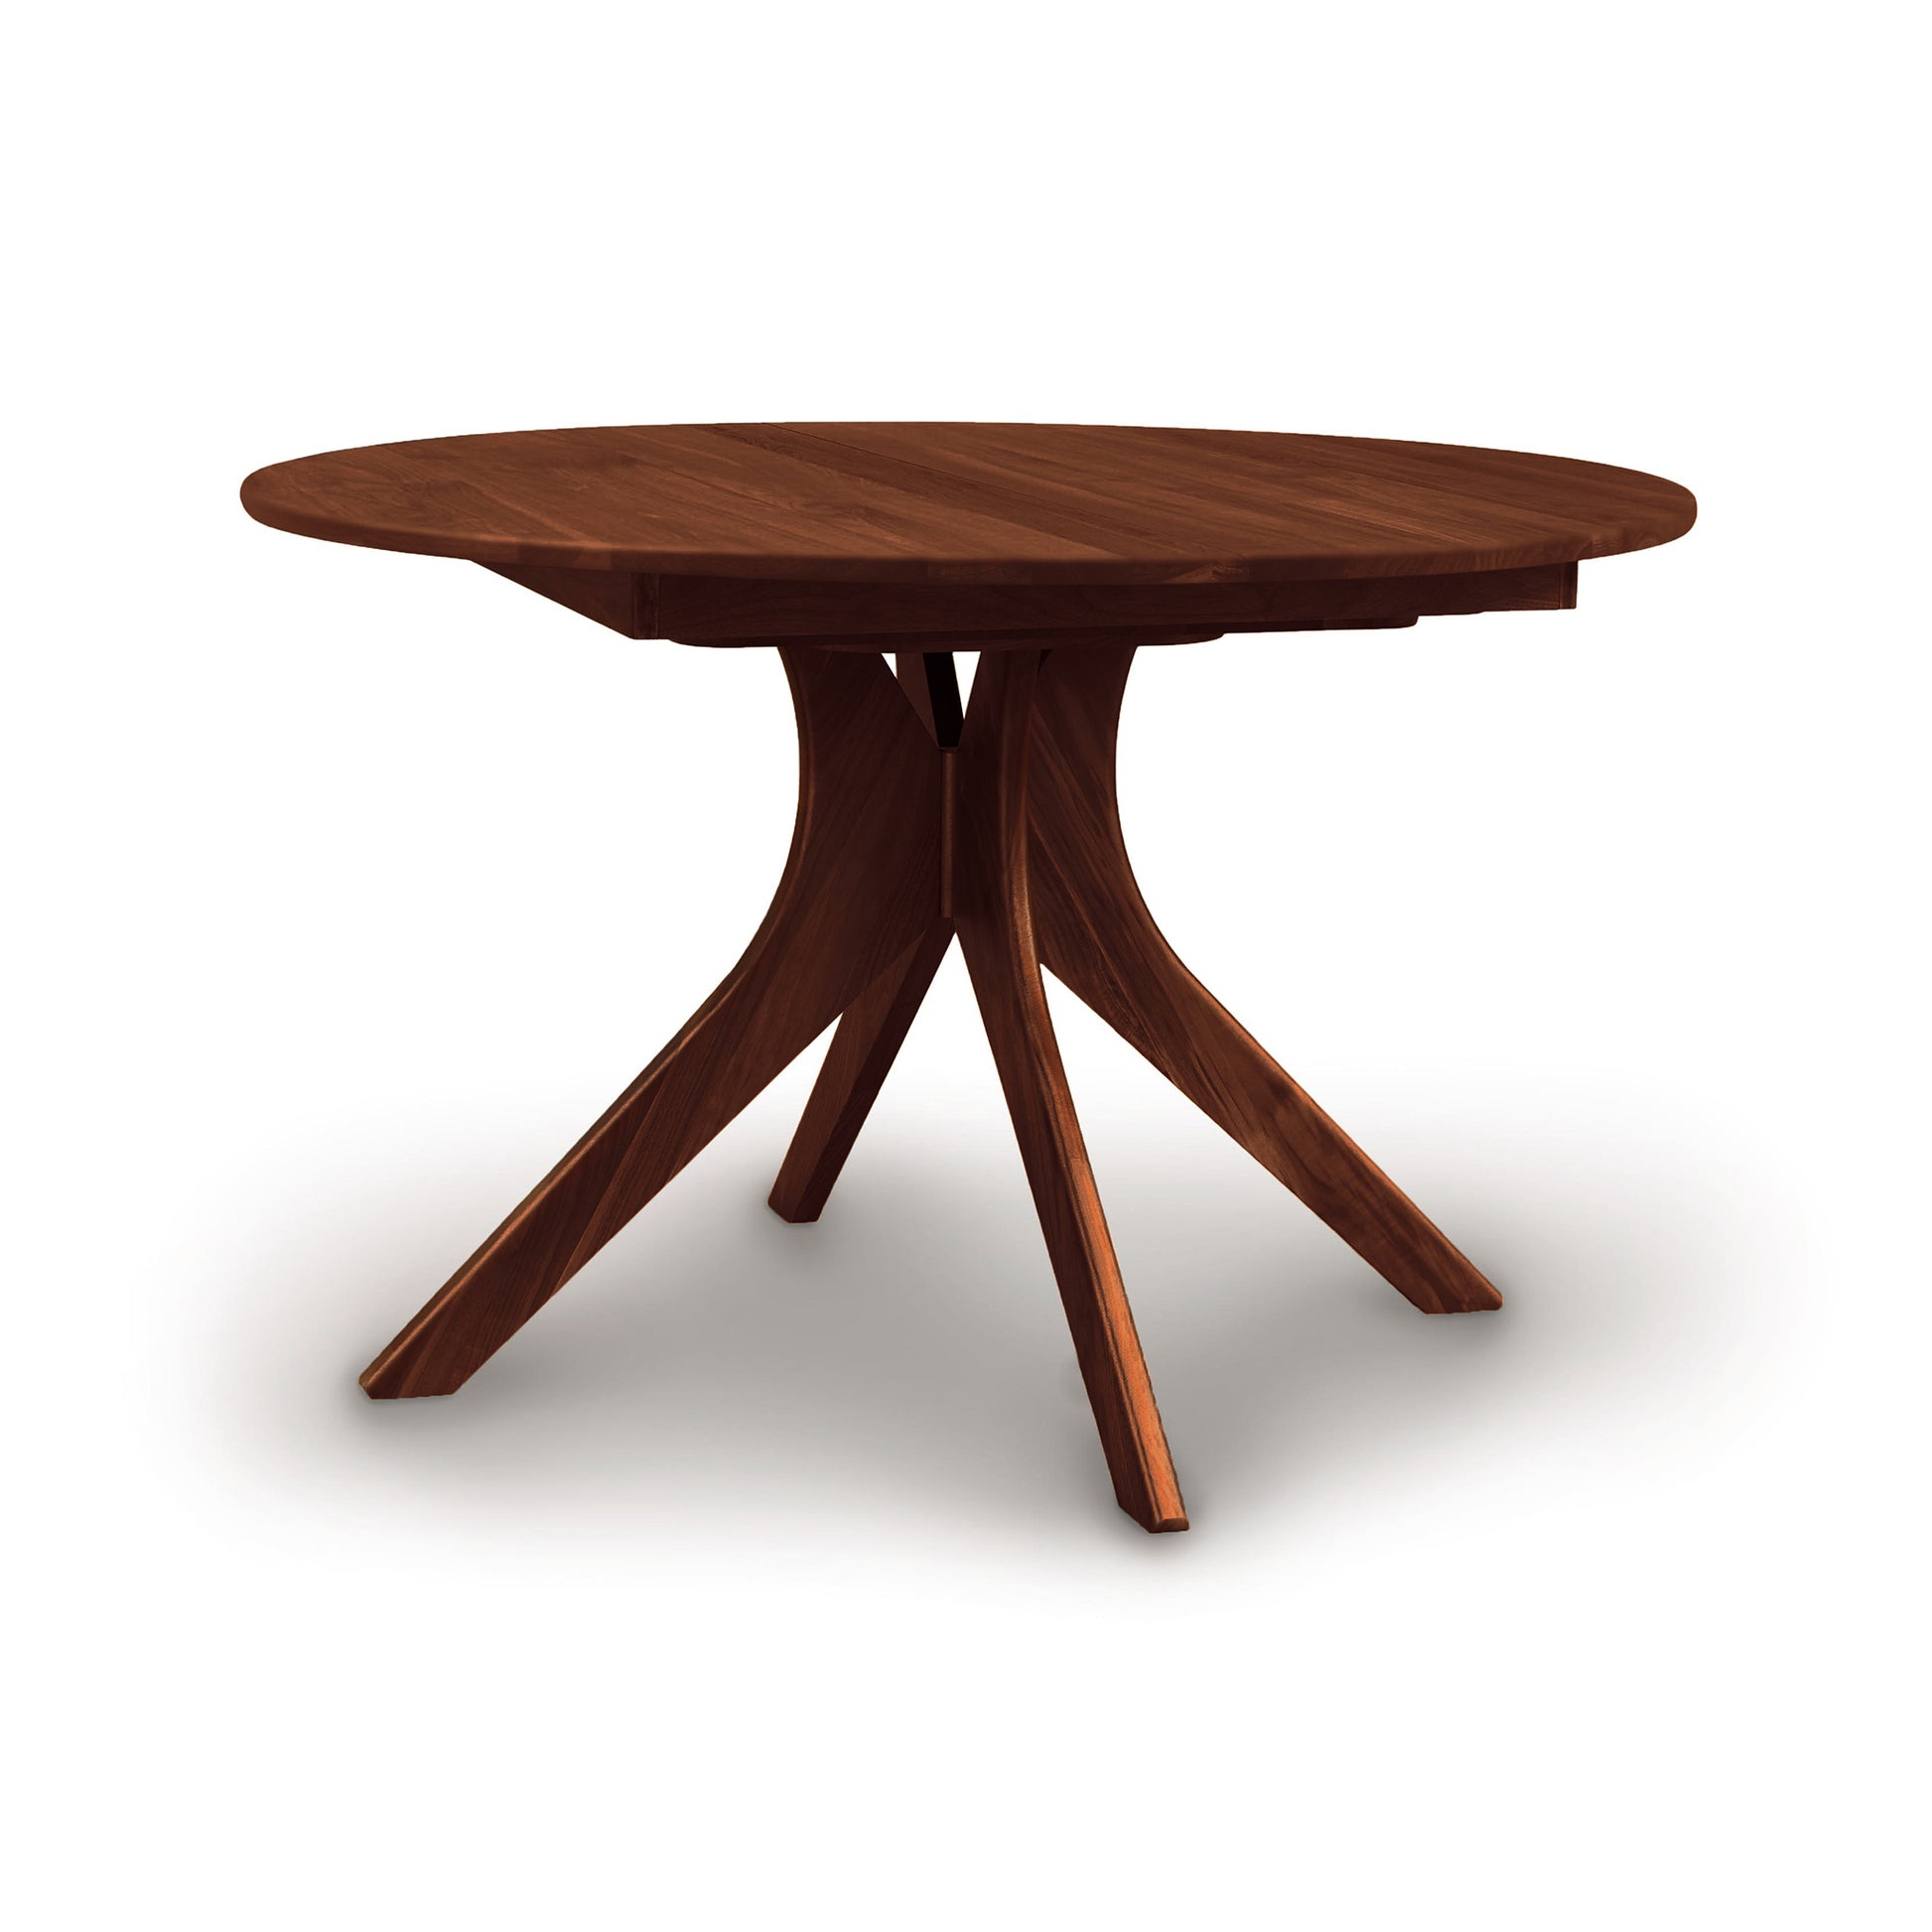 A Copeland Furniture Audrey Round Extension Dining Table with a radial base design and a butterfly leaf mechanism, isolated on a white background.